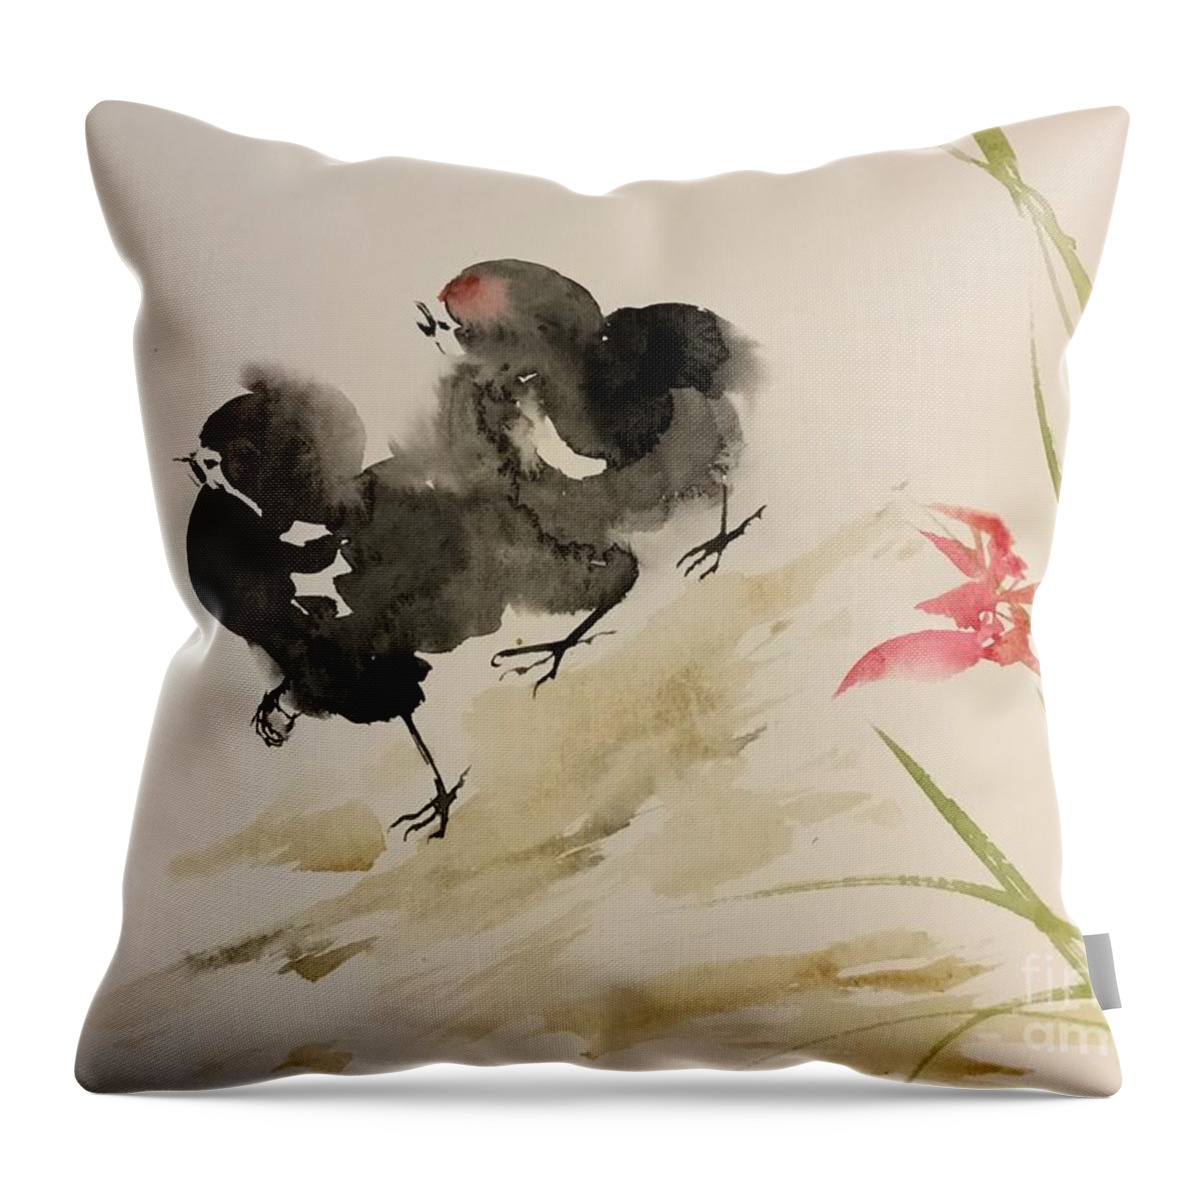 1402019 Throw Pillow featuring the painting 1402019 by Han in Huang wong